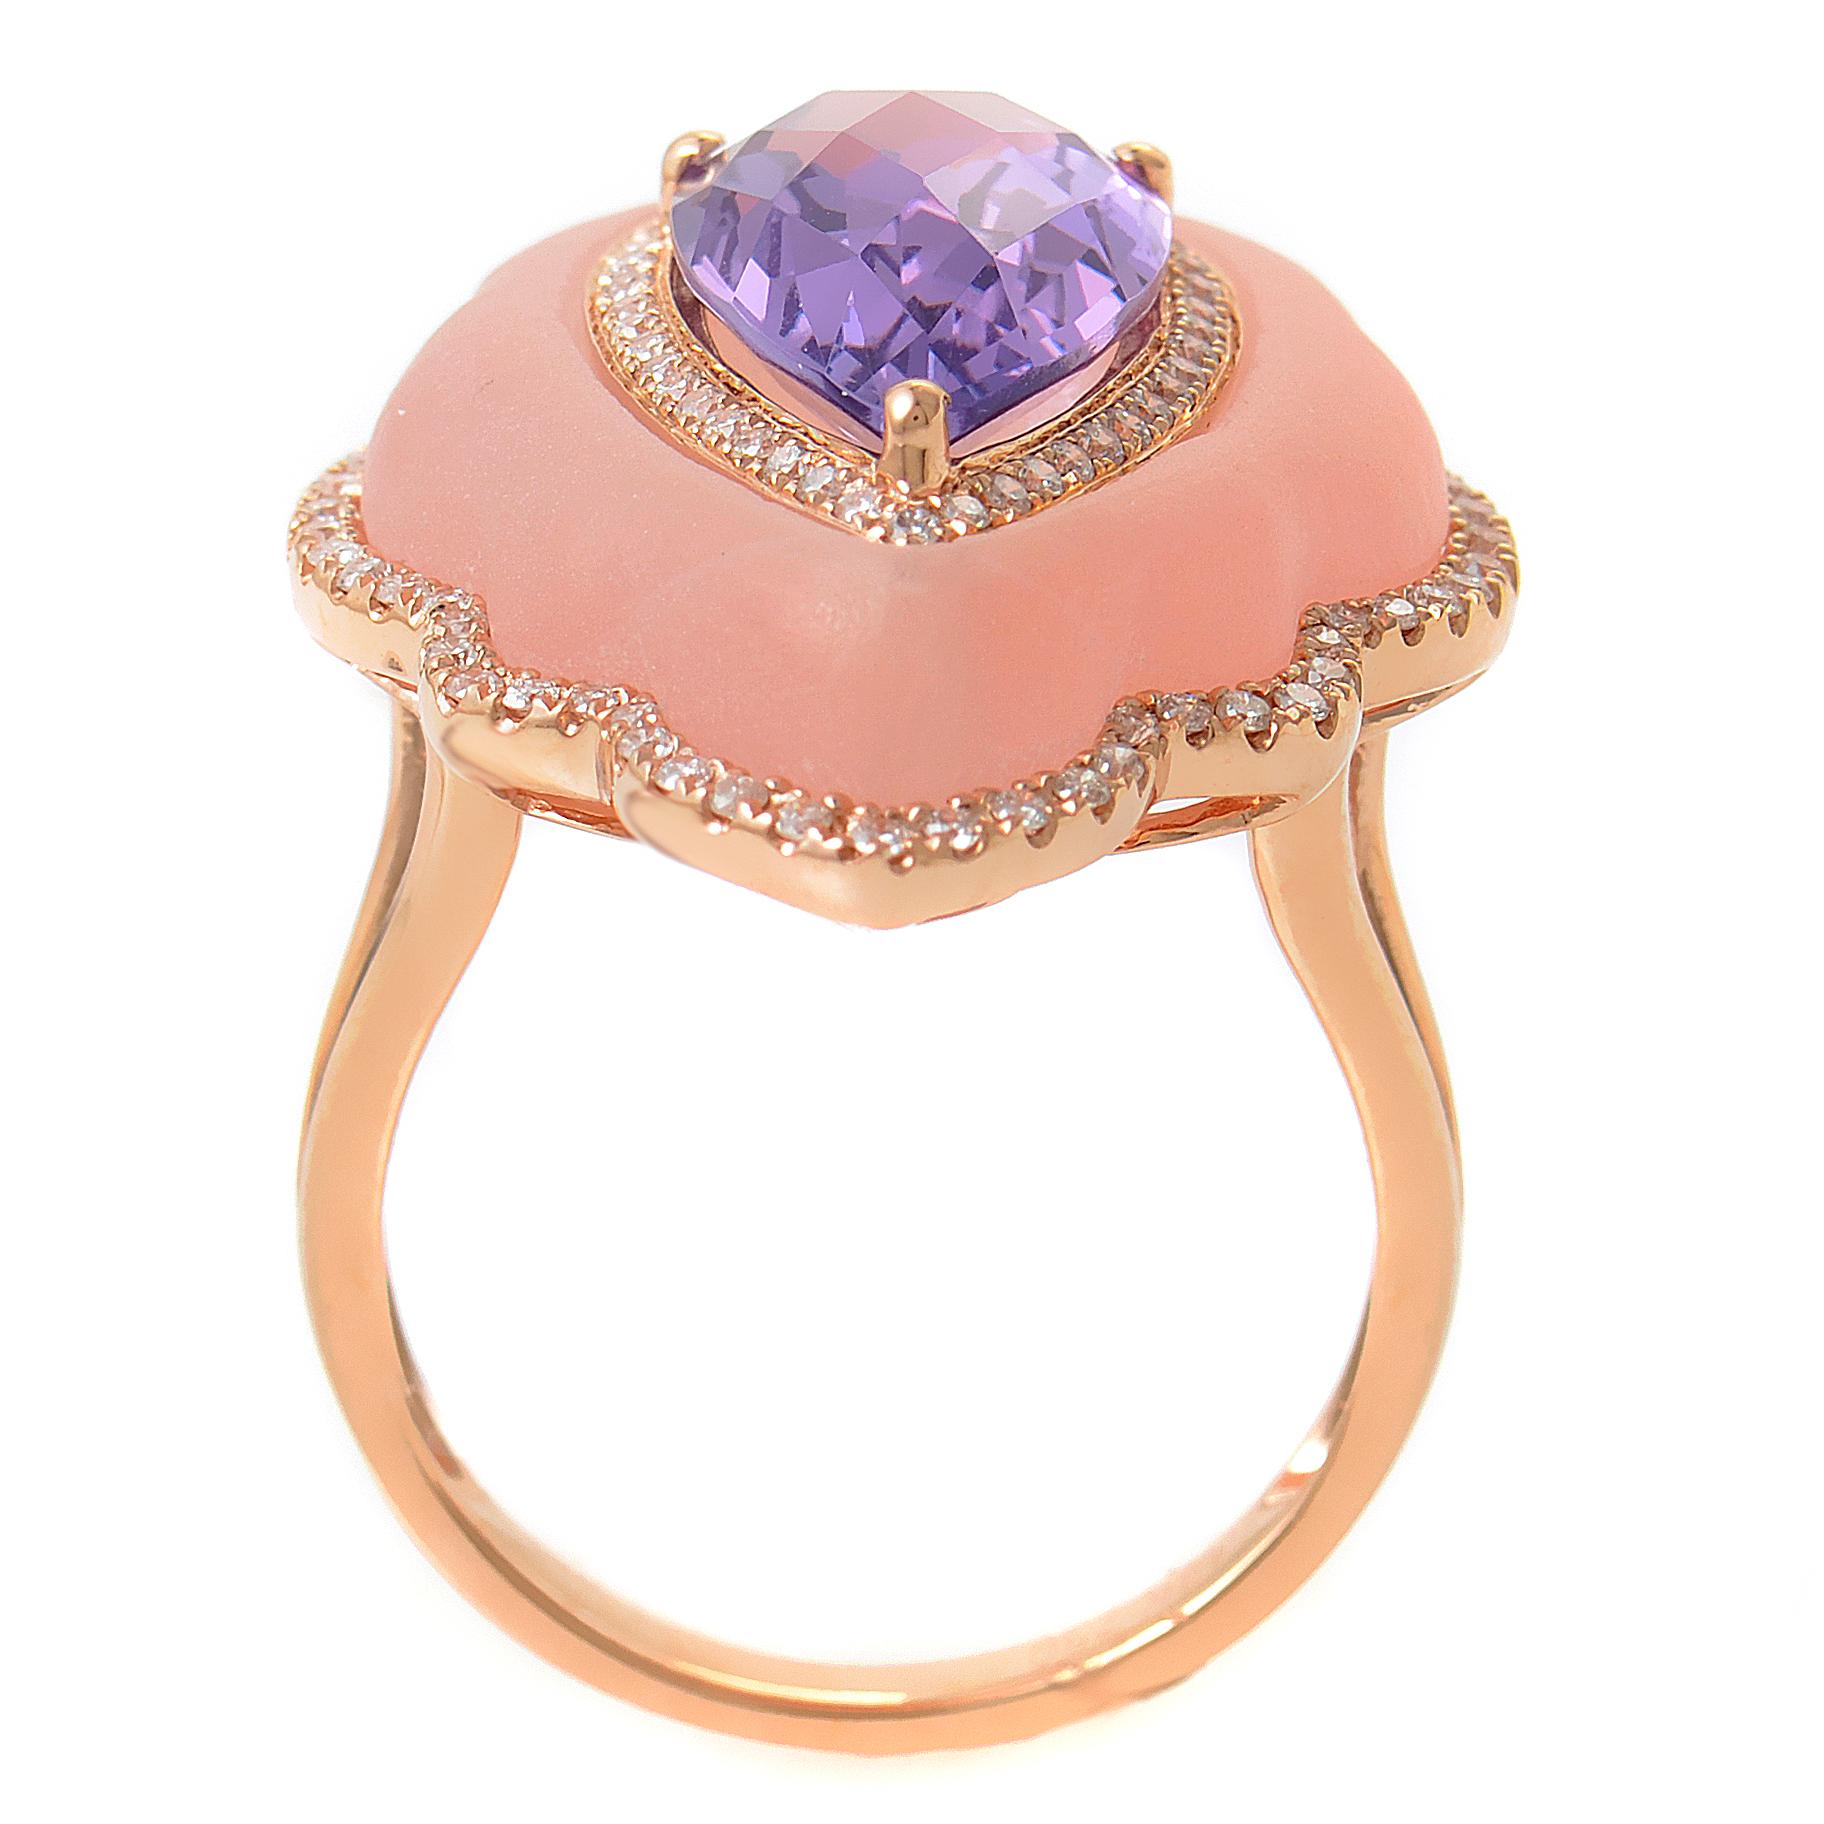 This ring is feminine and lovely. It is made of 18K rose gold and contains ~24.00ct of amethyst & pink quartz and is surrounded ~.43ct of diamonds.
Ring Size: 6.5